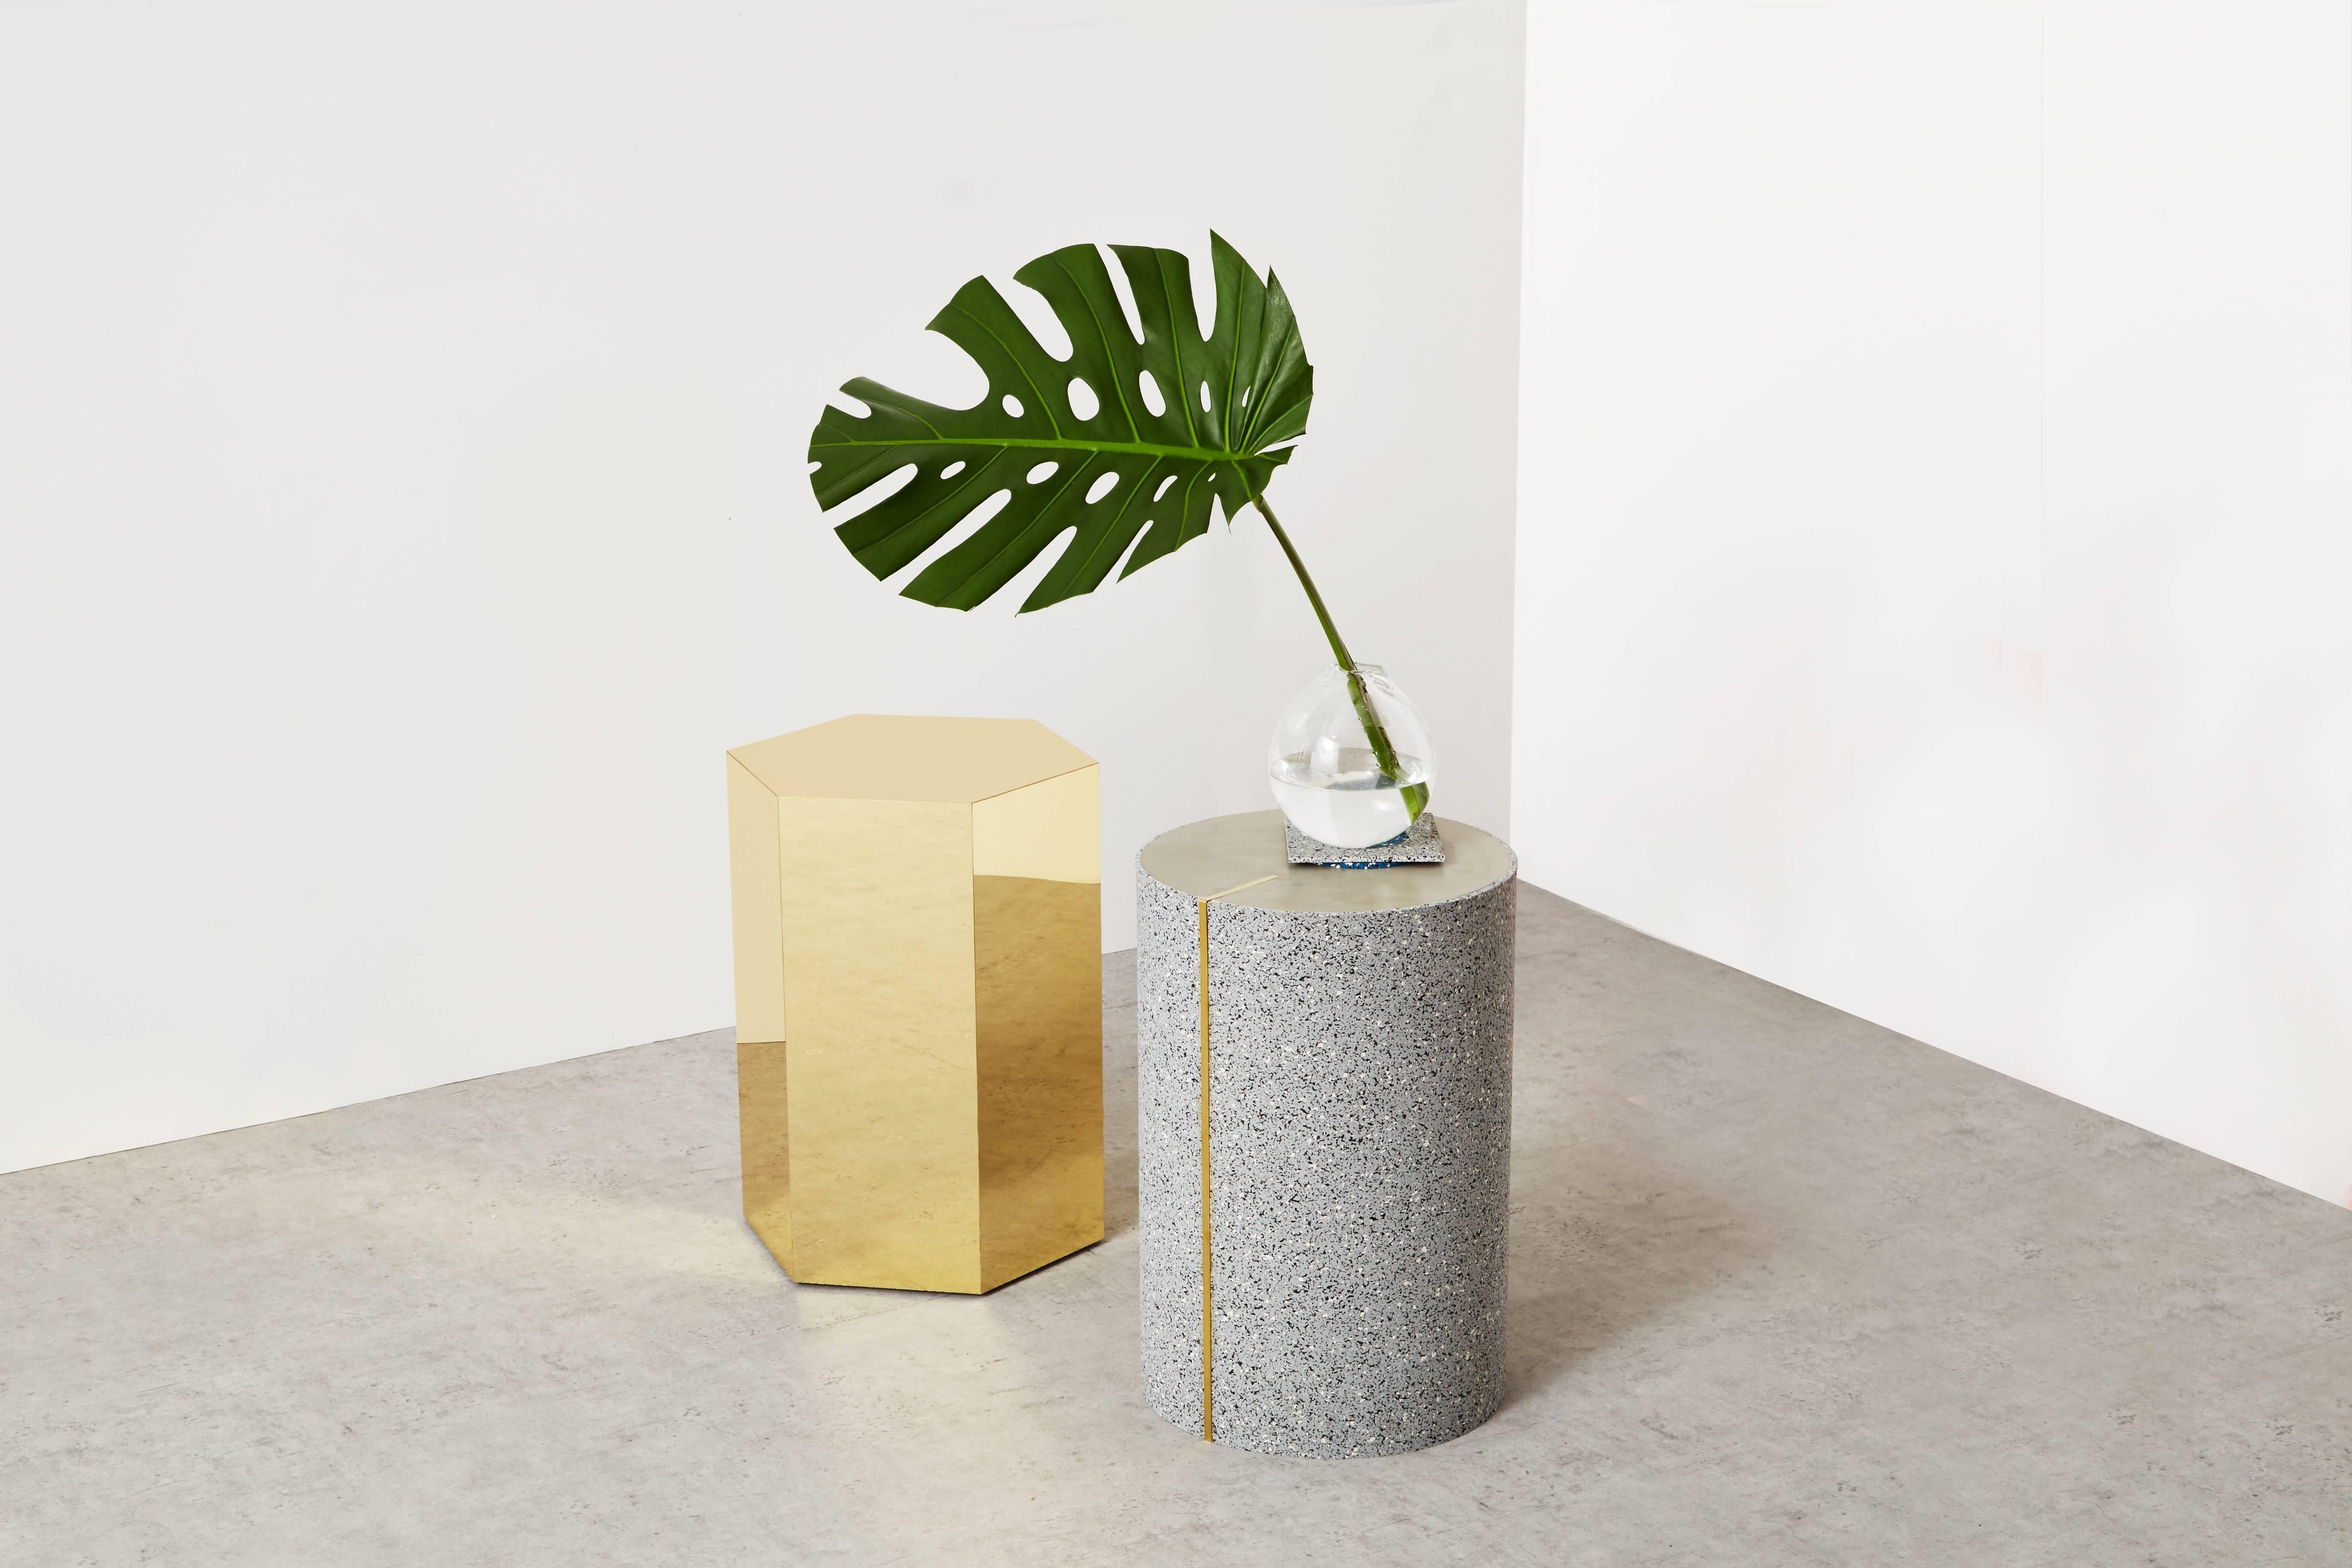 Shiny Hex side table created by Slash Objects.

Materials: Brass and marble.